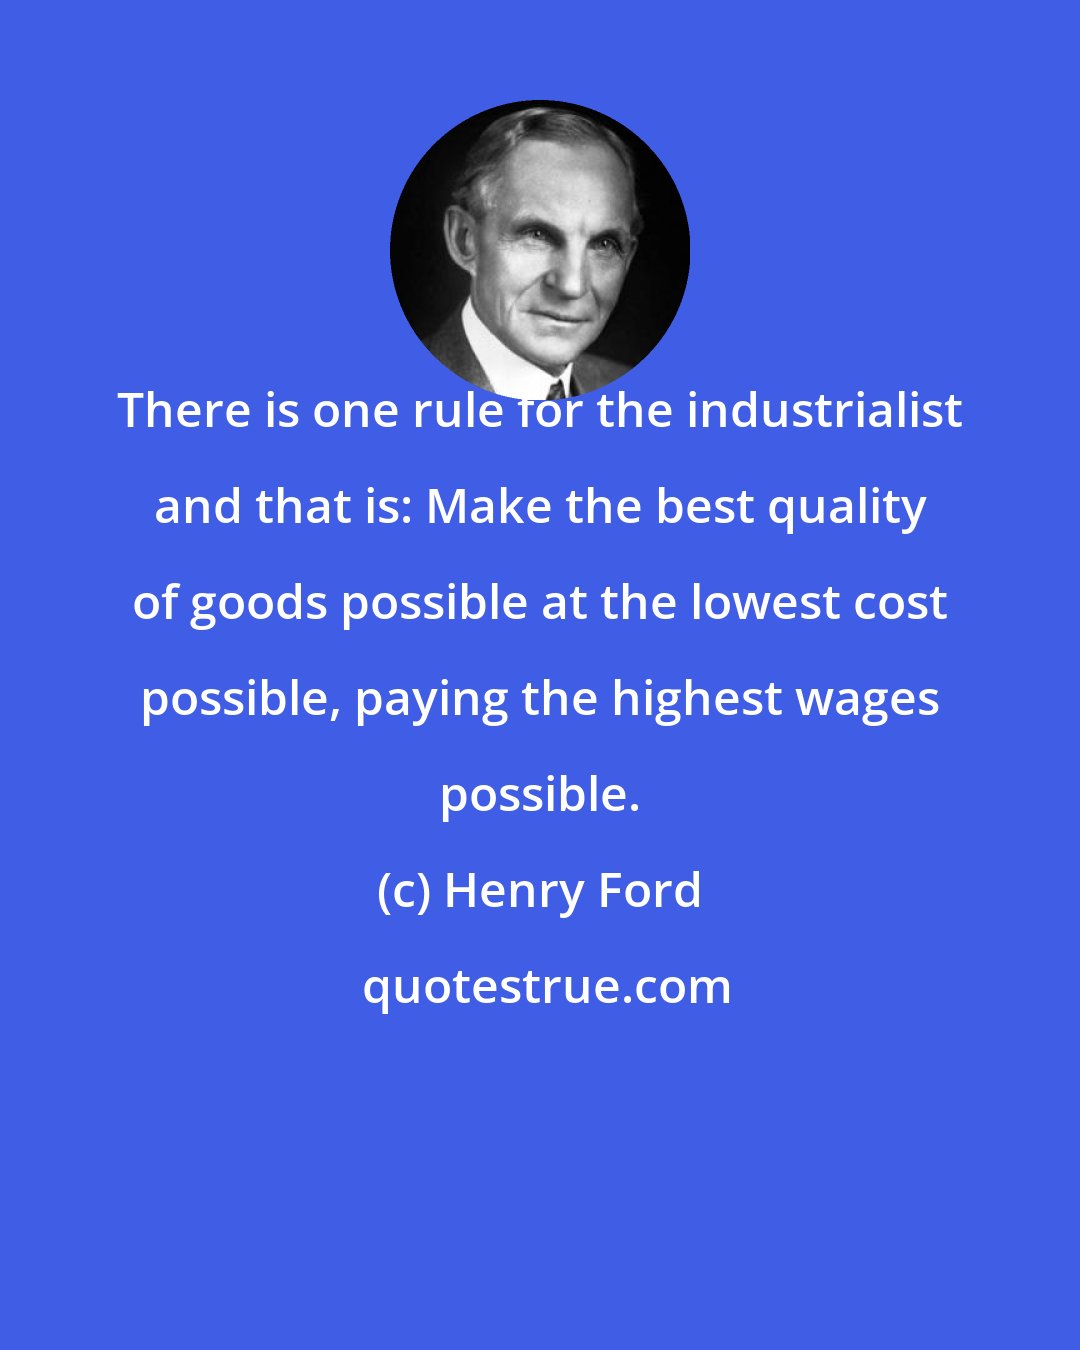 Henry Ford: There is one rule for the industrialist and that is: Make the best quality of goods possible at the lowest cost possible, paying the highest wages possible.